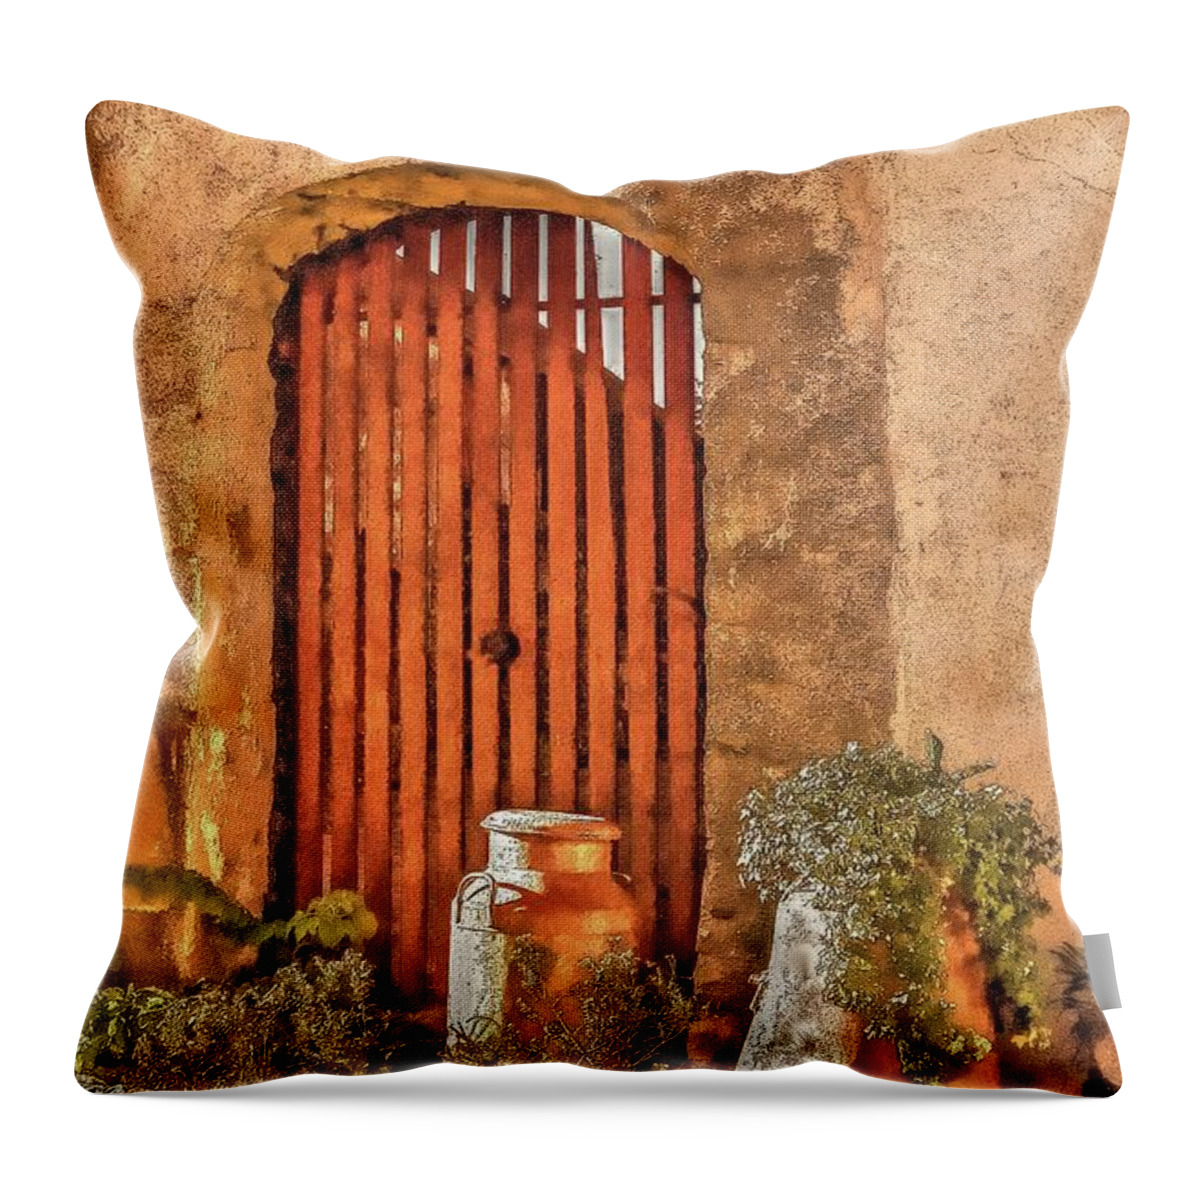 Ireland Throw Pillow featuring the photograph Ancient Contours by Randall Dill